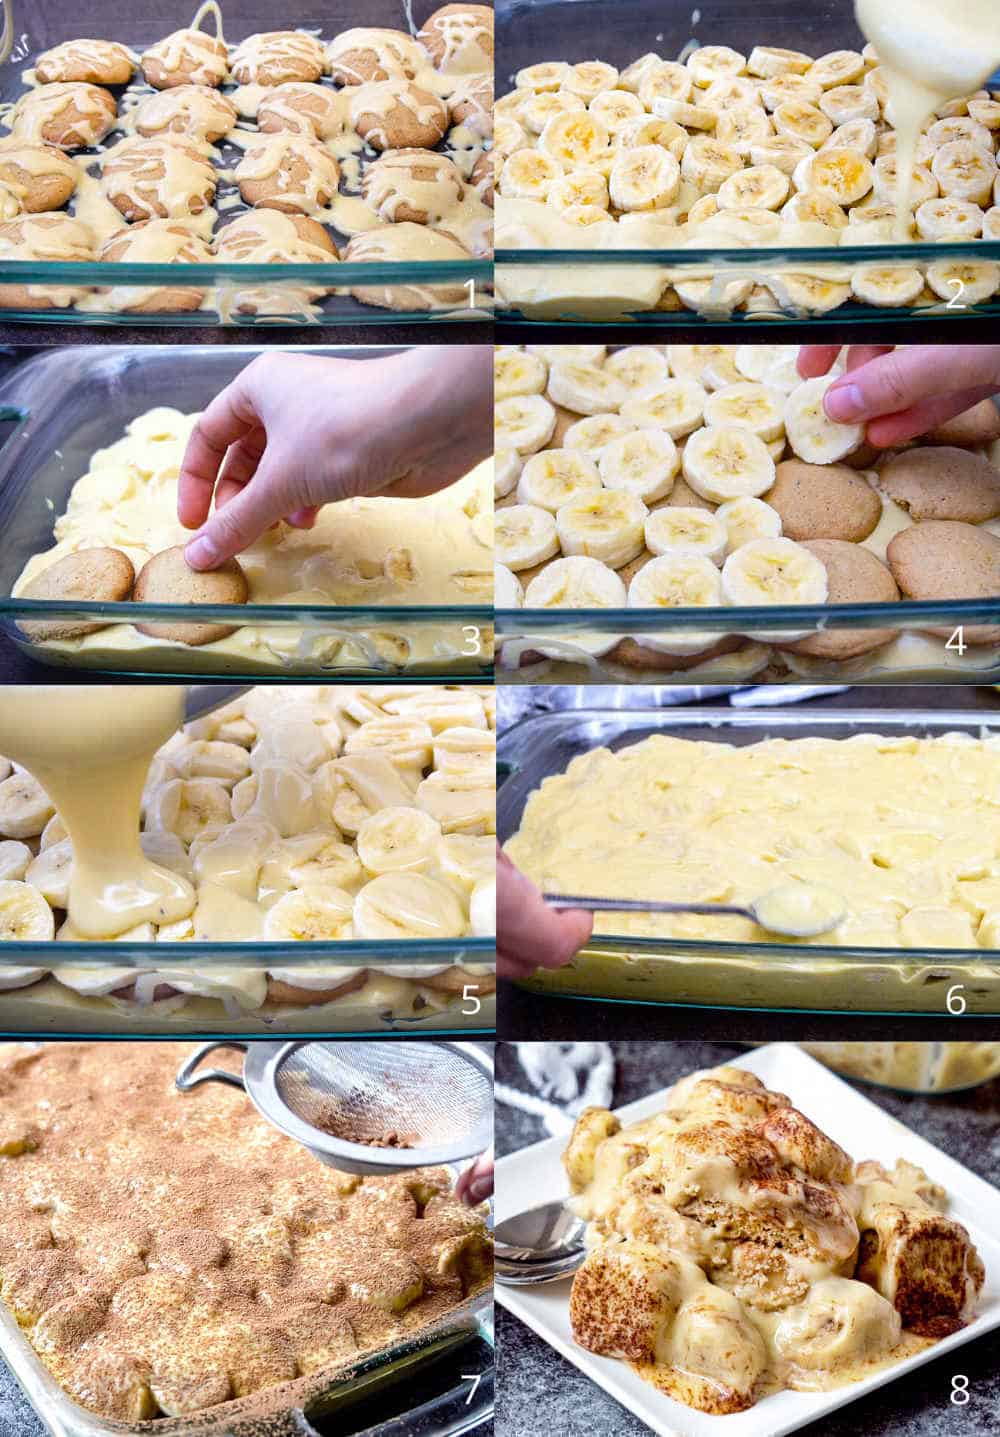 Process shots showing how to make homemade gluten free dairy free banana pudding from scratch.